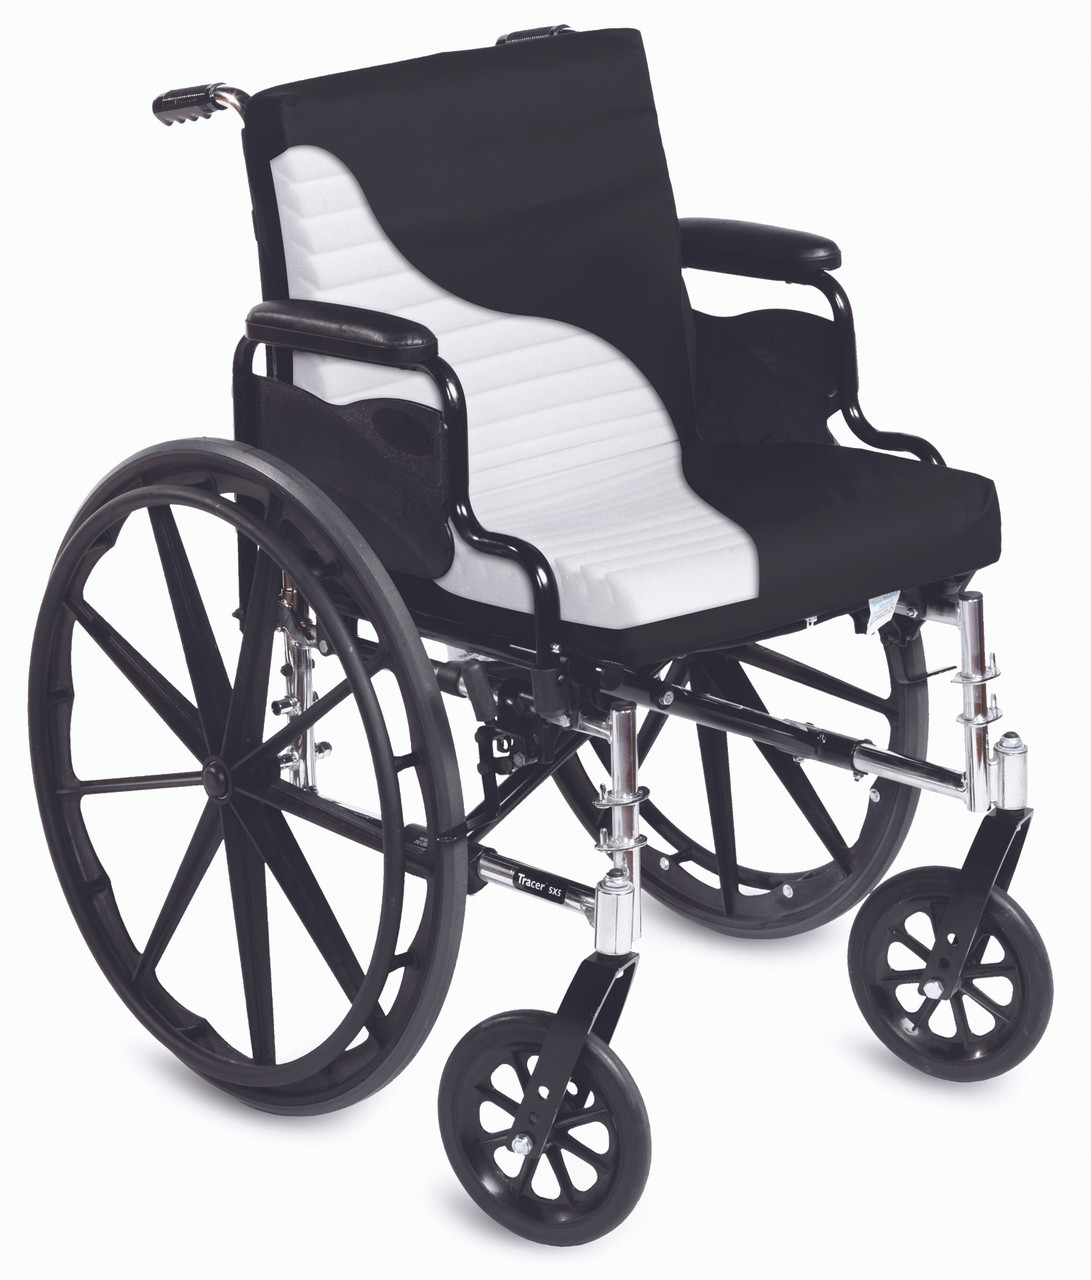 Short Wave Geri Cushion, Wheelchair Seat and Back Cushion, Removable Zippered Cover, Reduces Shear, Fluid-Repellant Cover, Wipes Clean, Easy to Use.